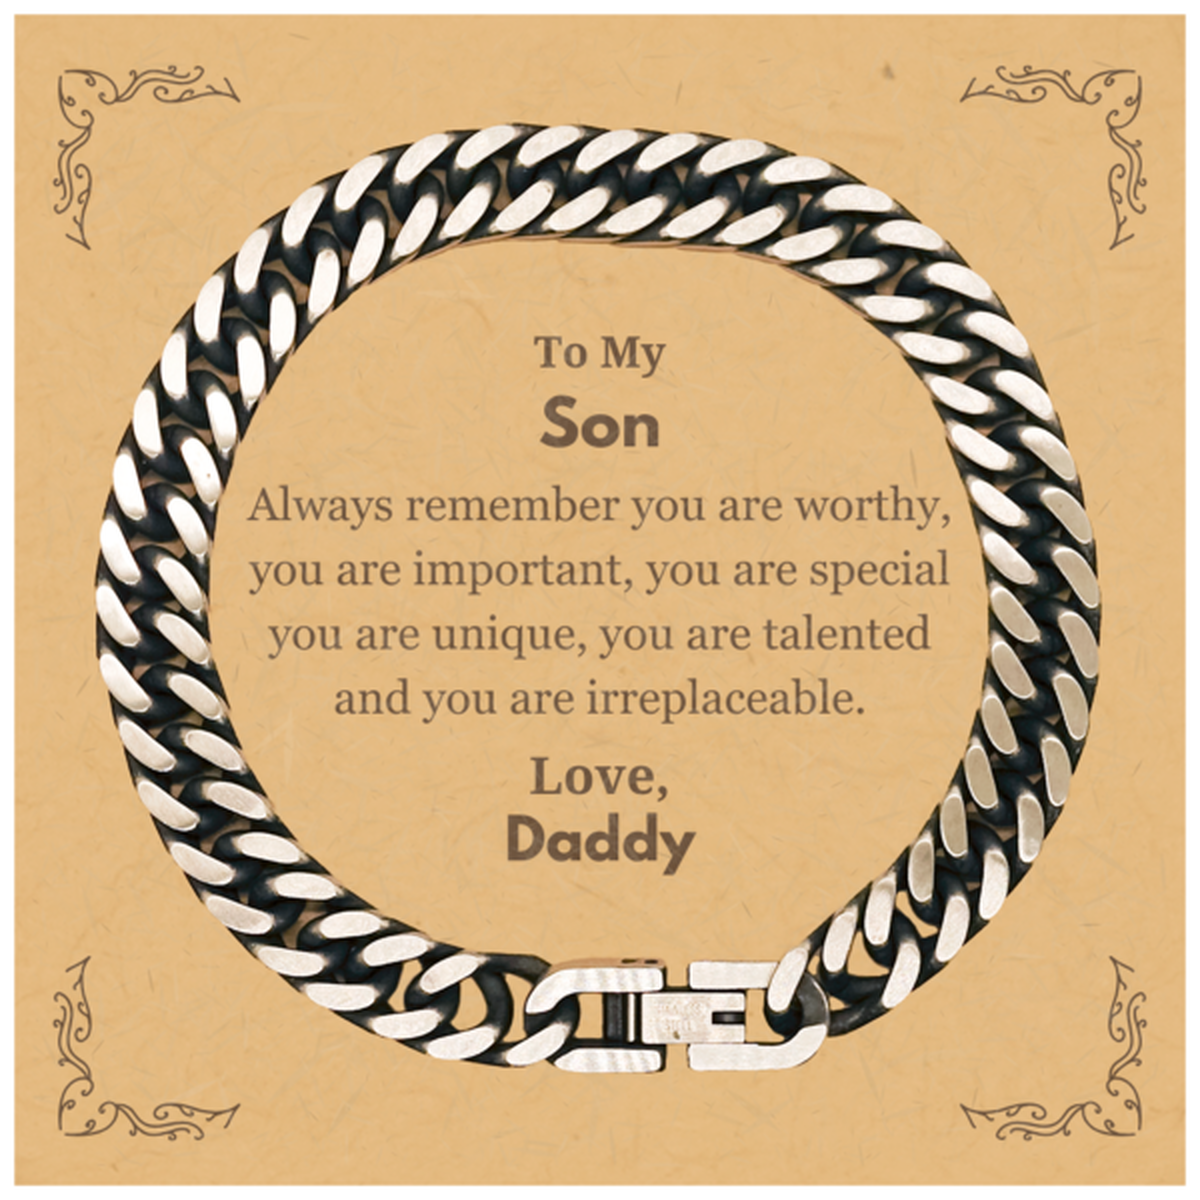 Son Birthday Gifts from Daddy, Inspirational Cuban Link Chain Bracelet for Son Christmas Graduation Gifts for Son Always remember you are worthy, you are important. Love, Daddy